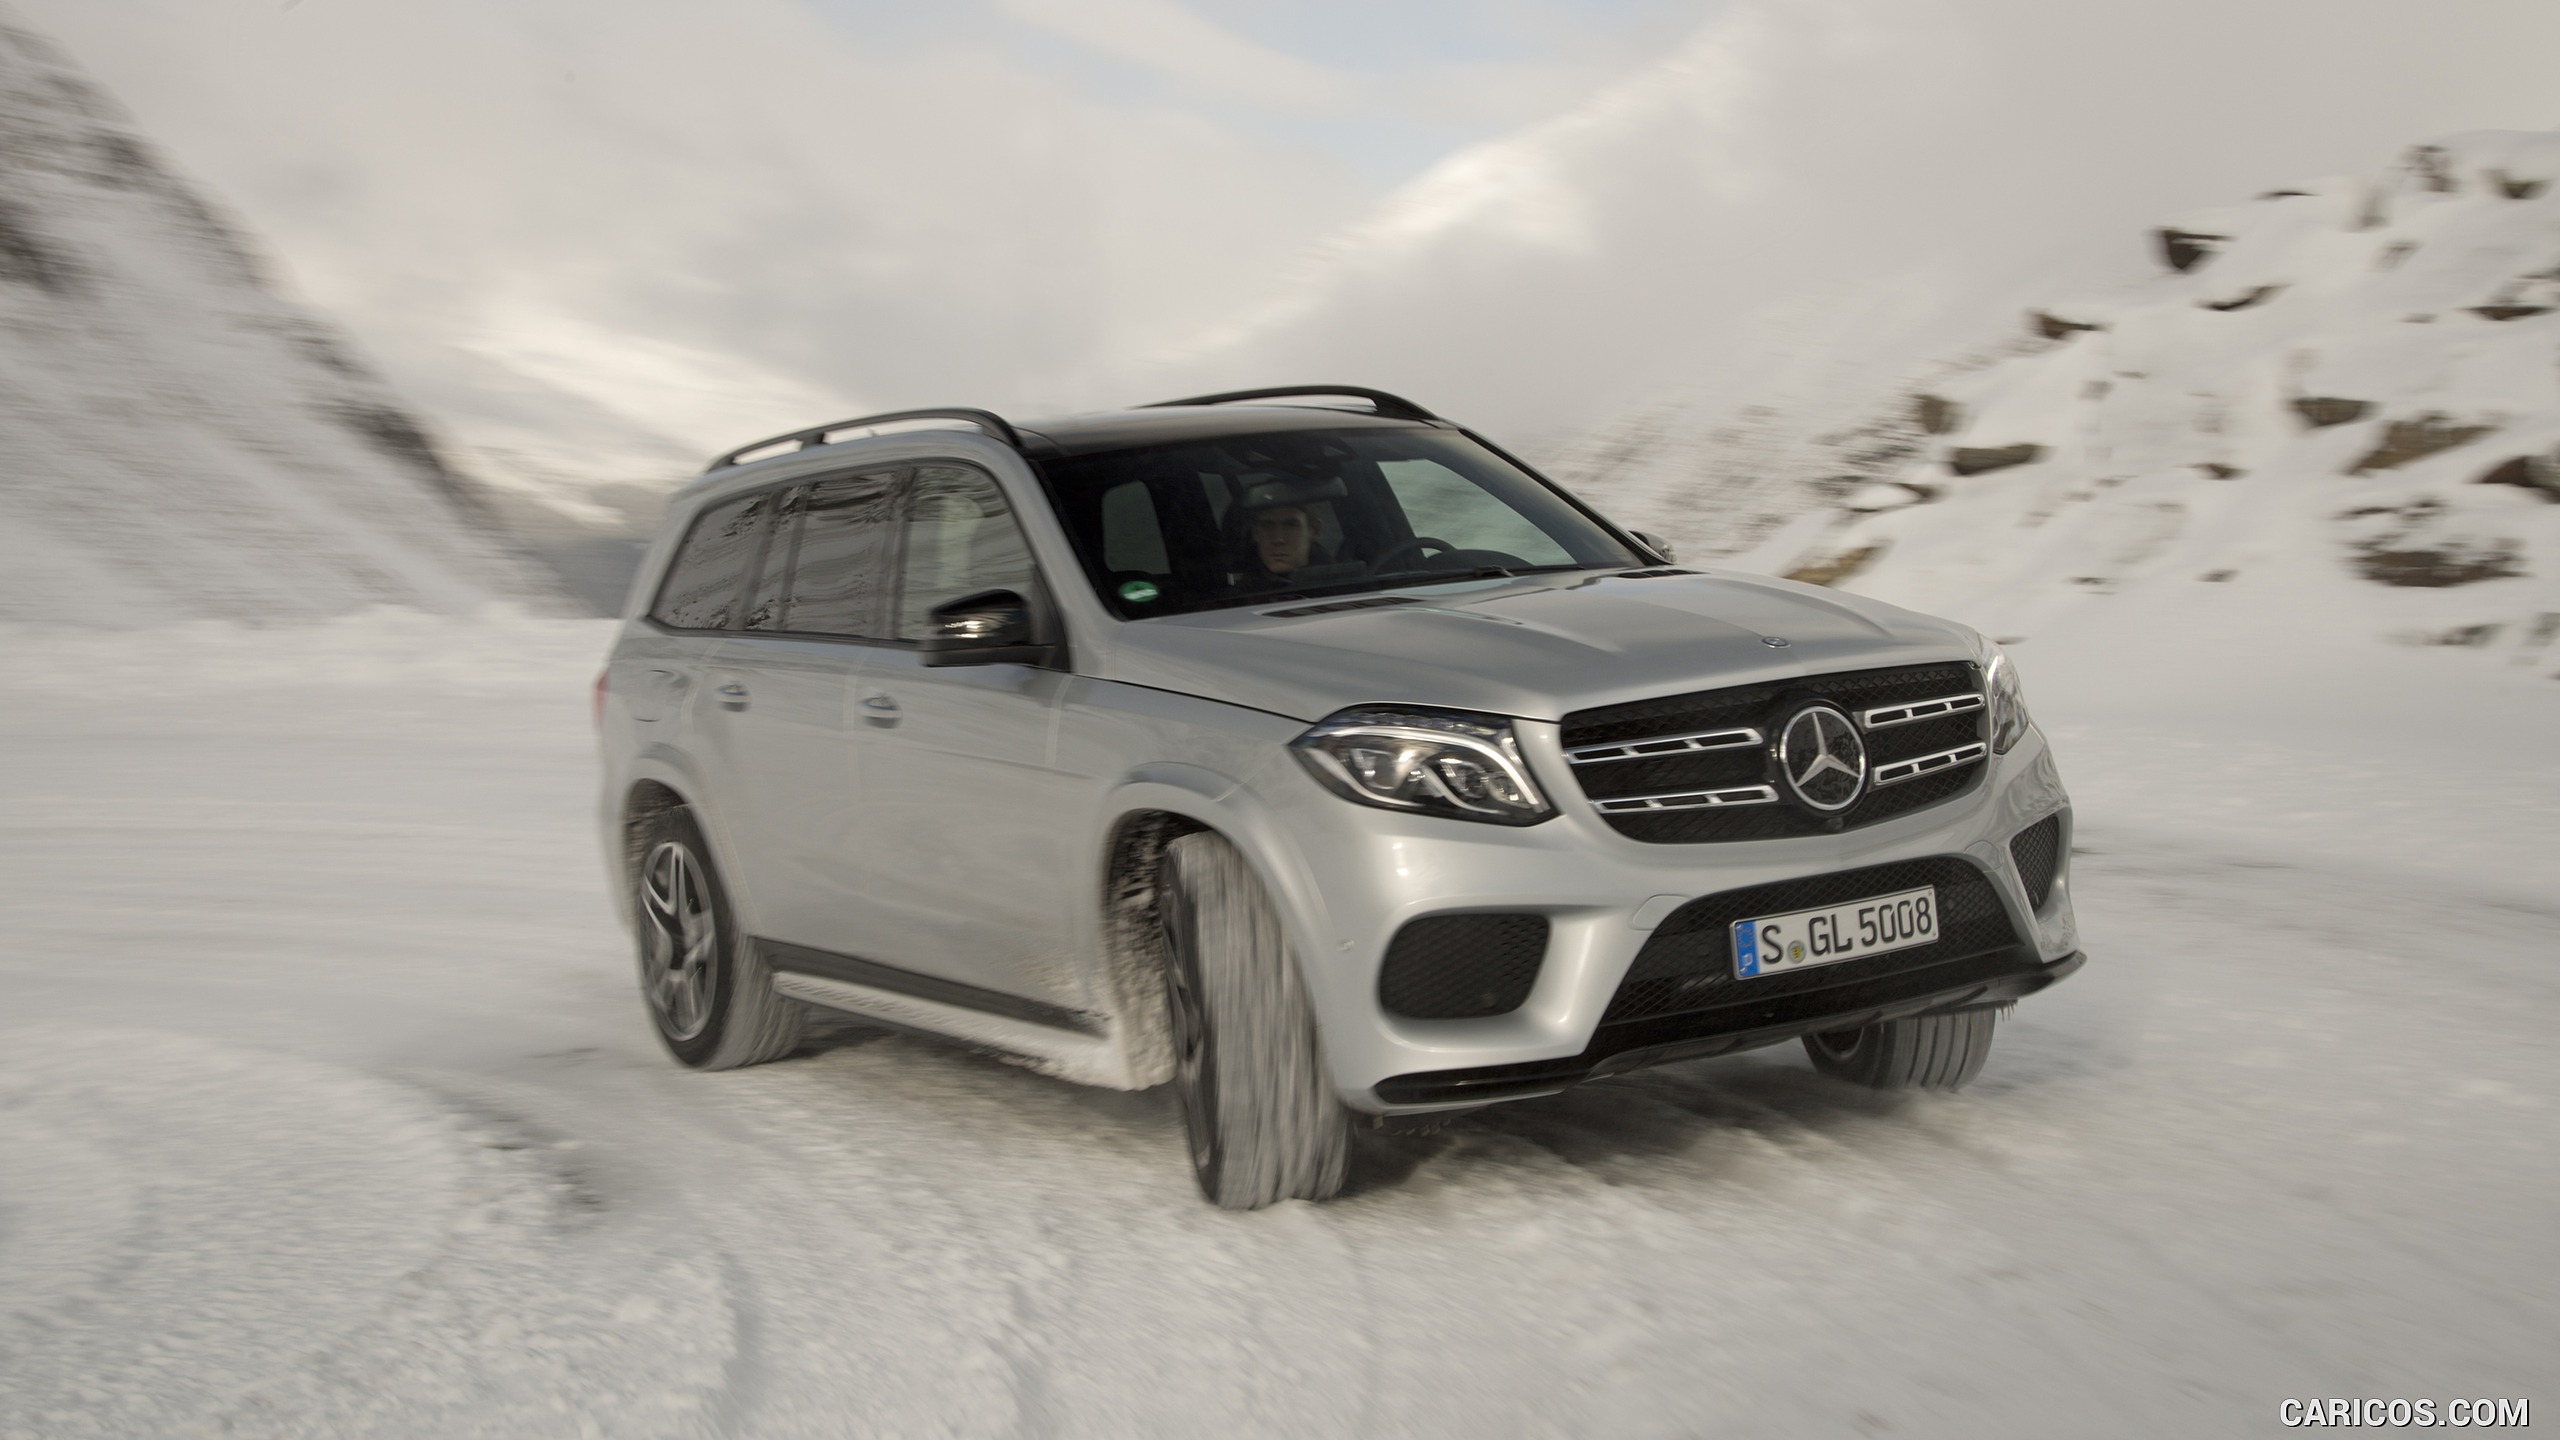 2017 Mercedes-Benz GLS 500 4MATIC AMG Line in Snow - Front, #136 of 255